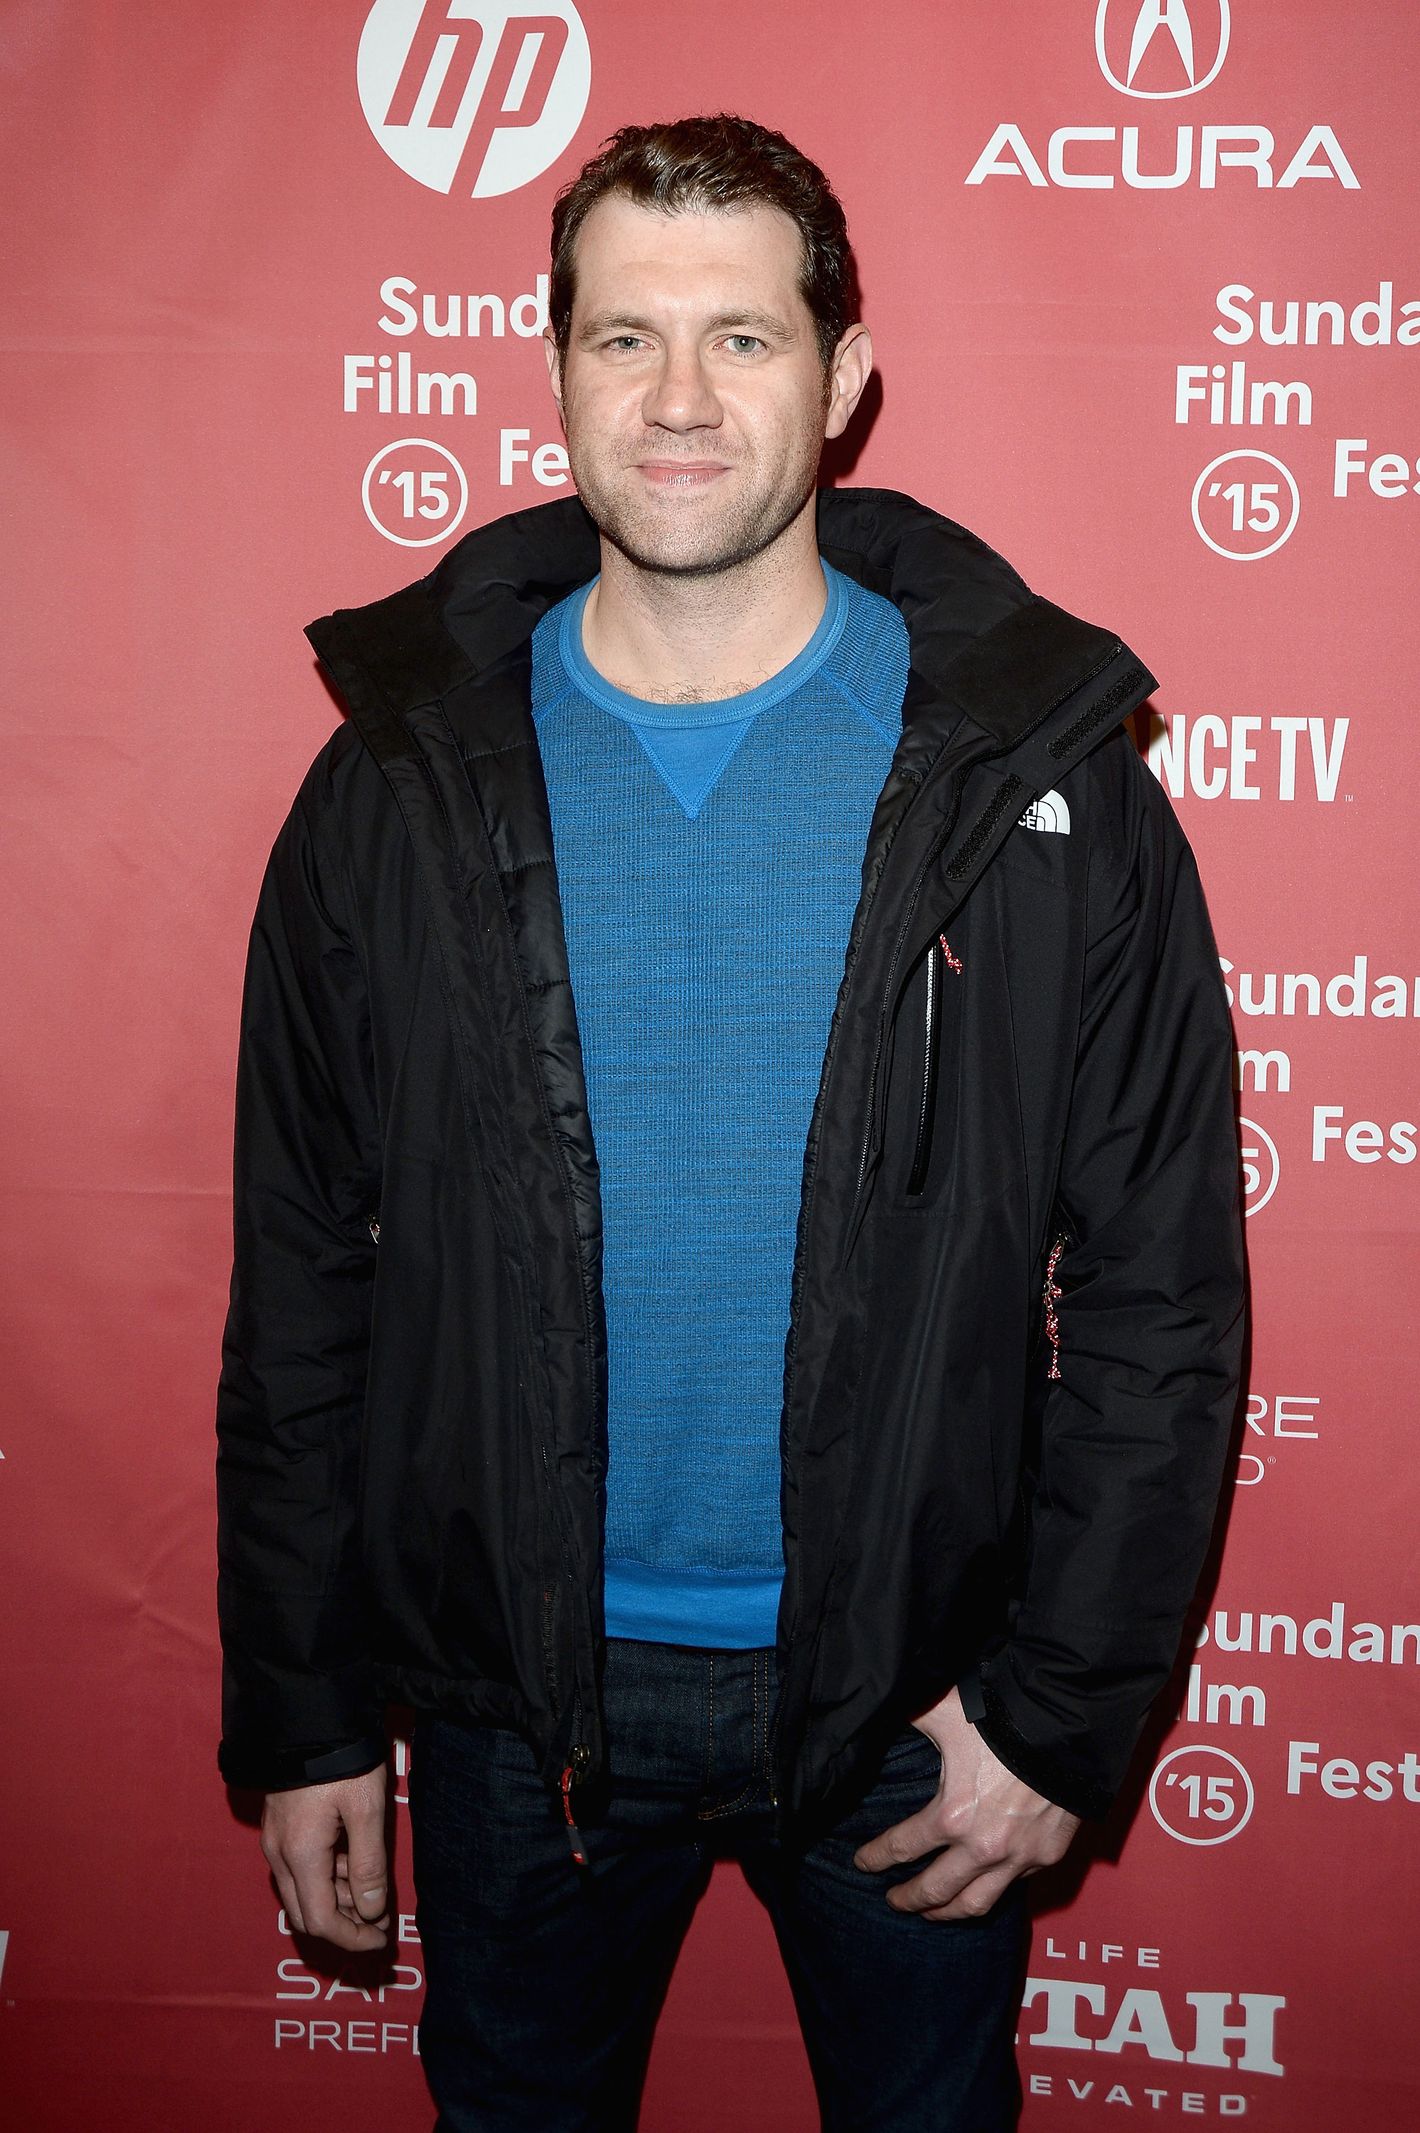 The Style Report: Sundance's Scruffy, Festival-Cool Outerwear